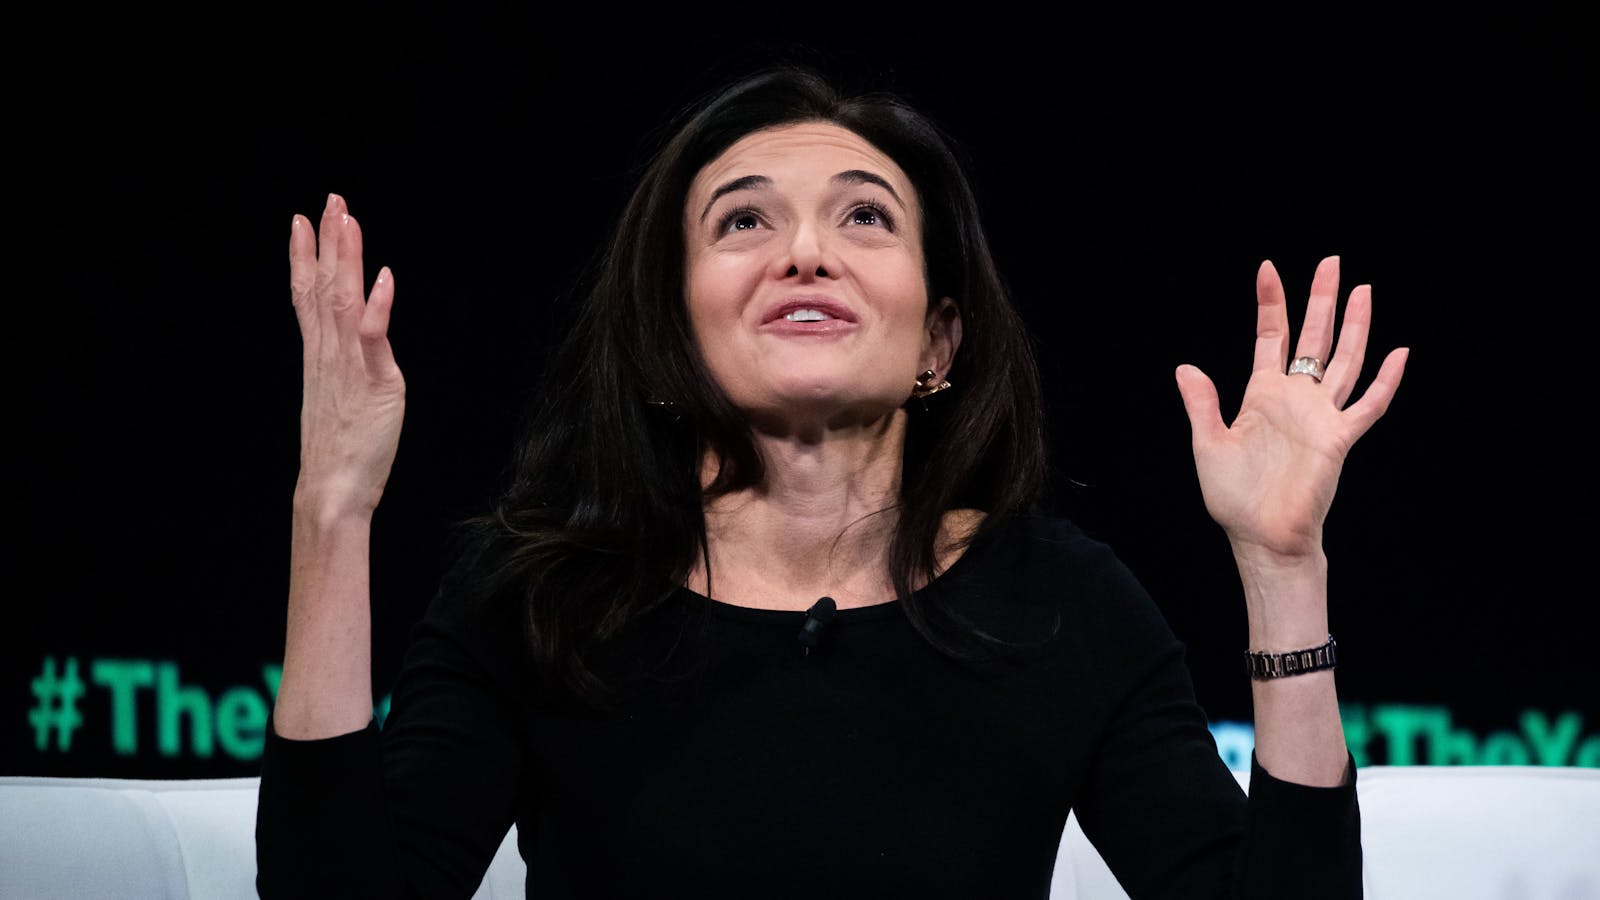 Facebook COO Sheryl Sandberg in 2019. Photo by Bloomberg